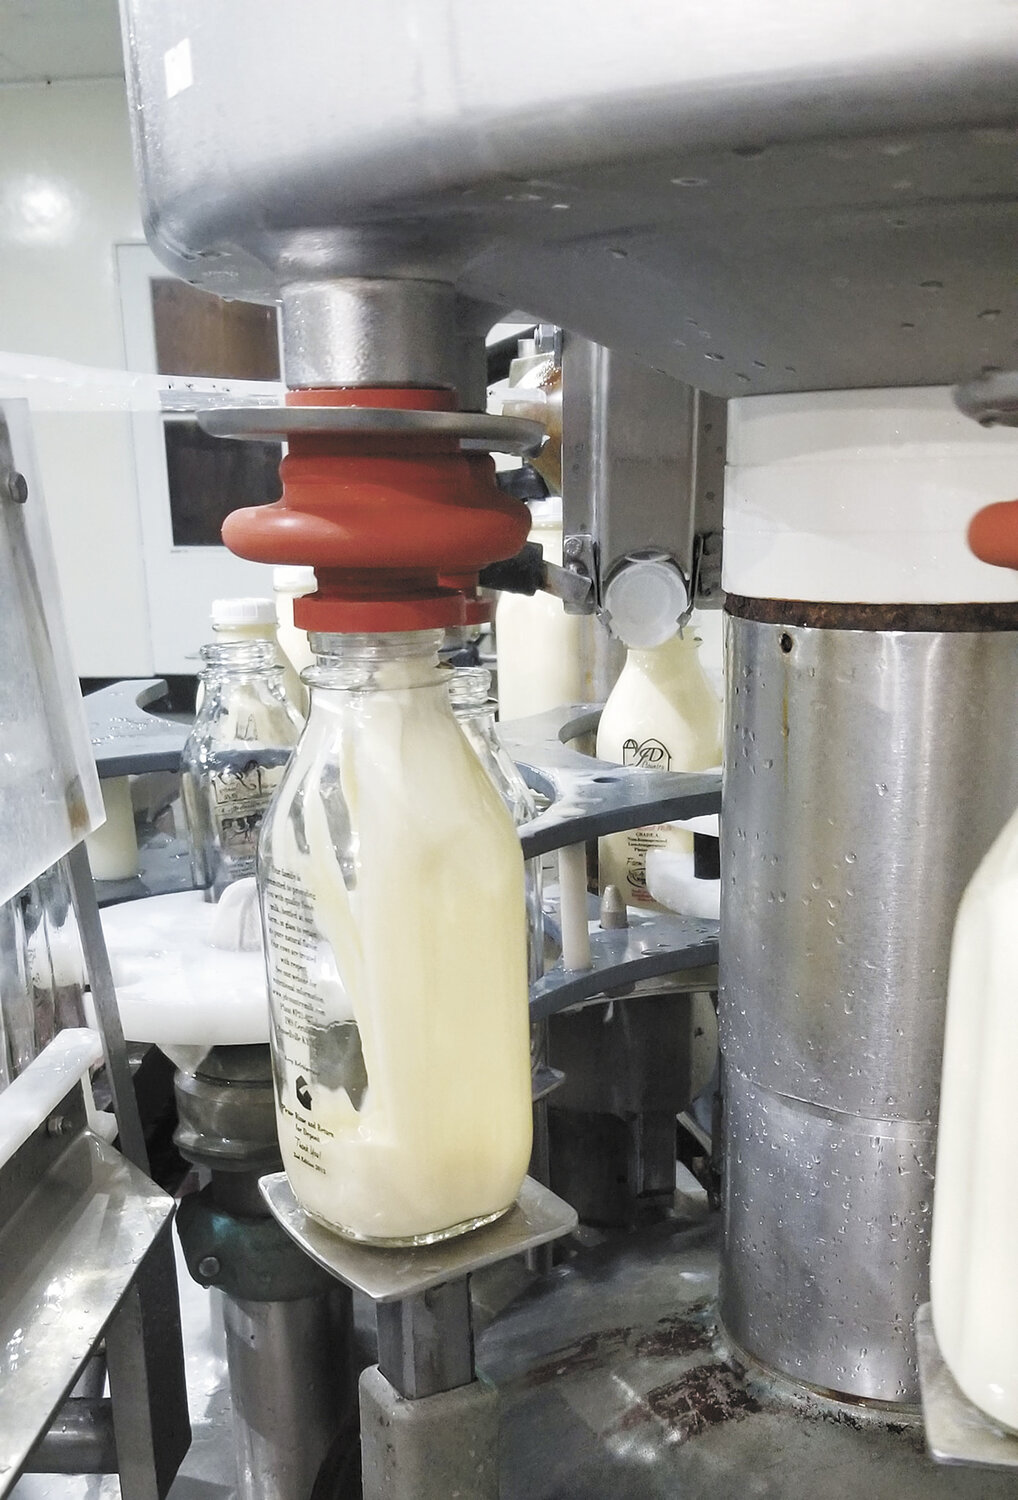 A machine fills a glass bottle of milk at JD Country Milk near Russellville, Kentucky. JD Country Milk sells whole milk, 2% milk, skim milk and chocolate milk in glass bottles, as well as cream, half and half and buttermilk. Seasonally, they offer strawberry milk made with actual strawberries, drinkable yogurt and eggnog.